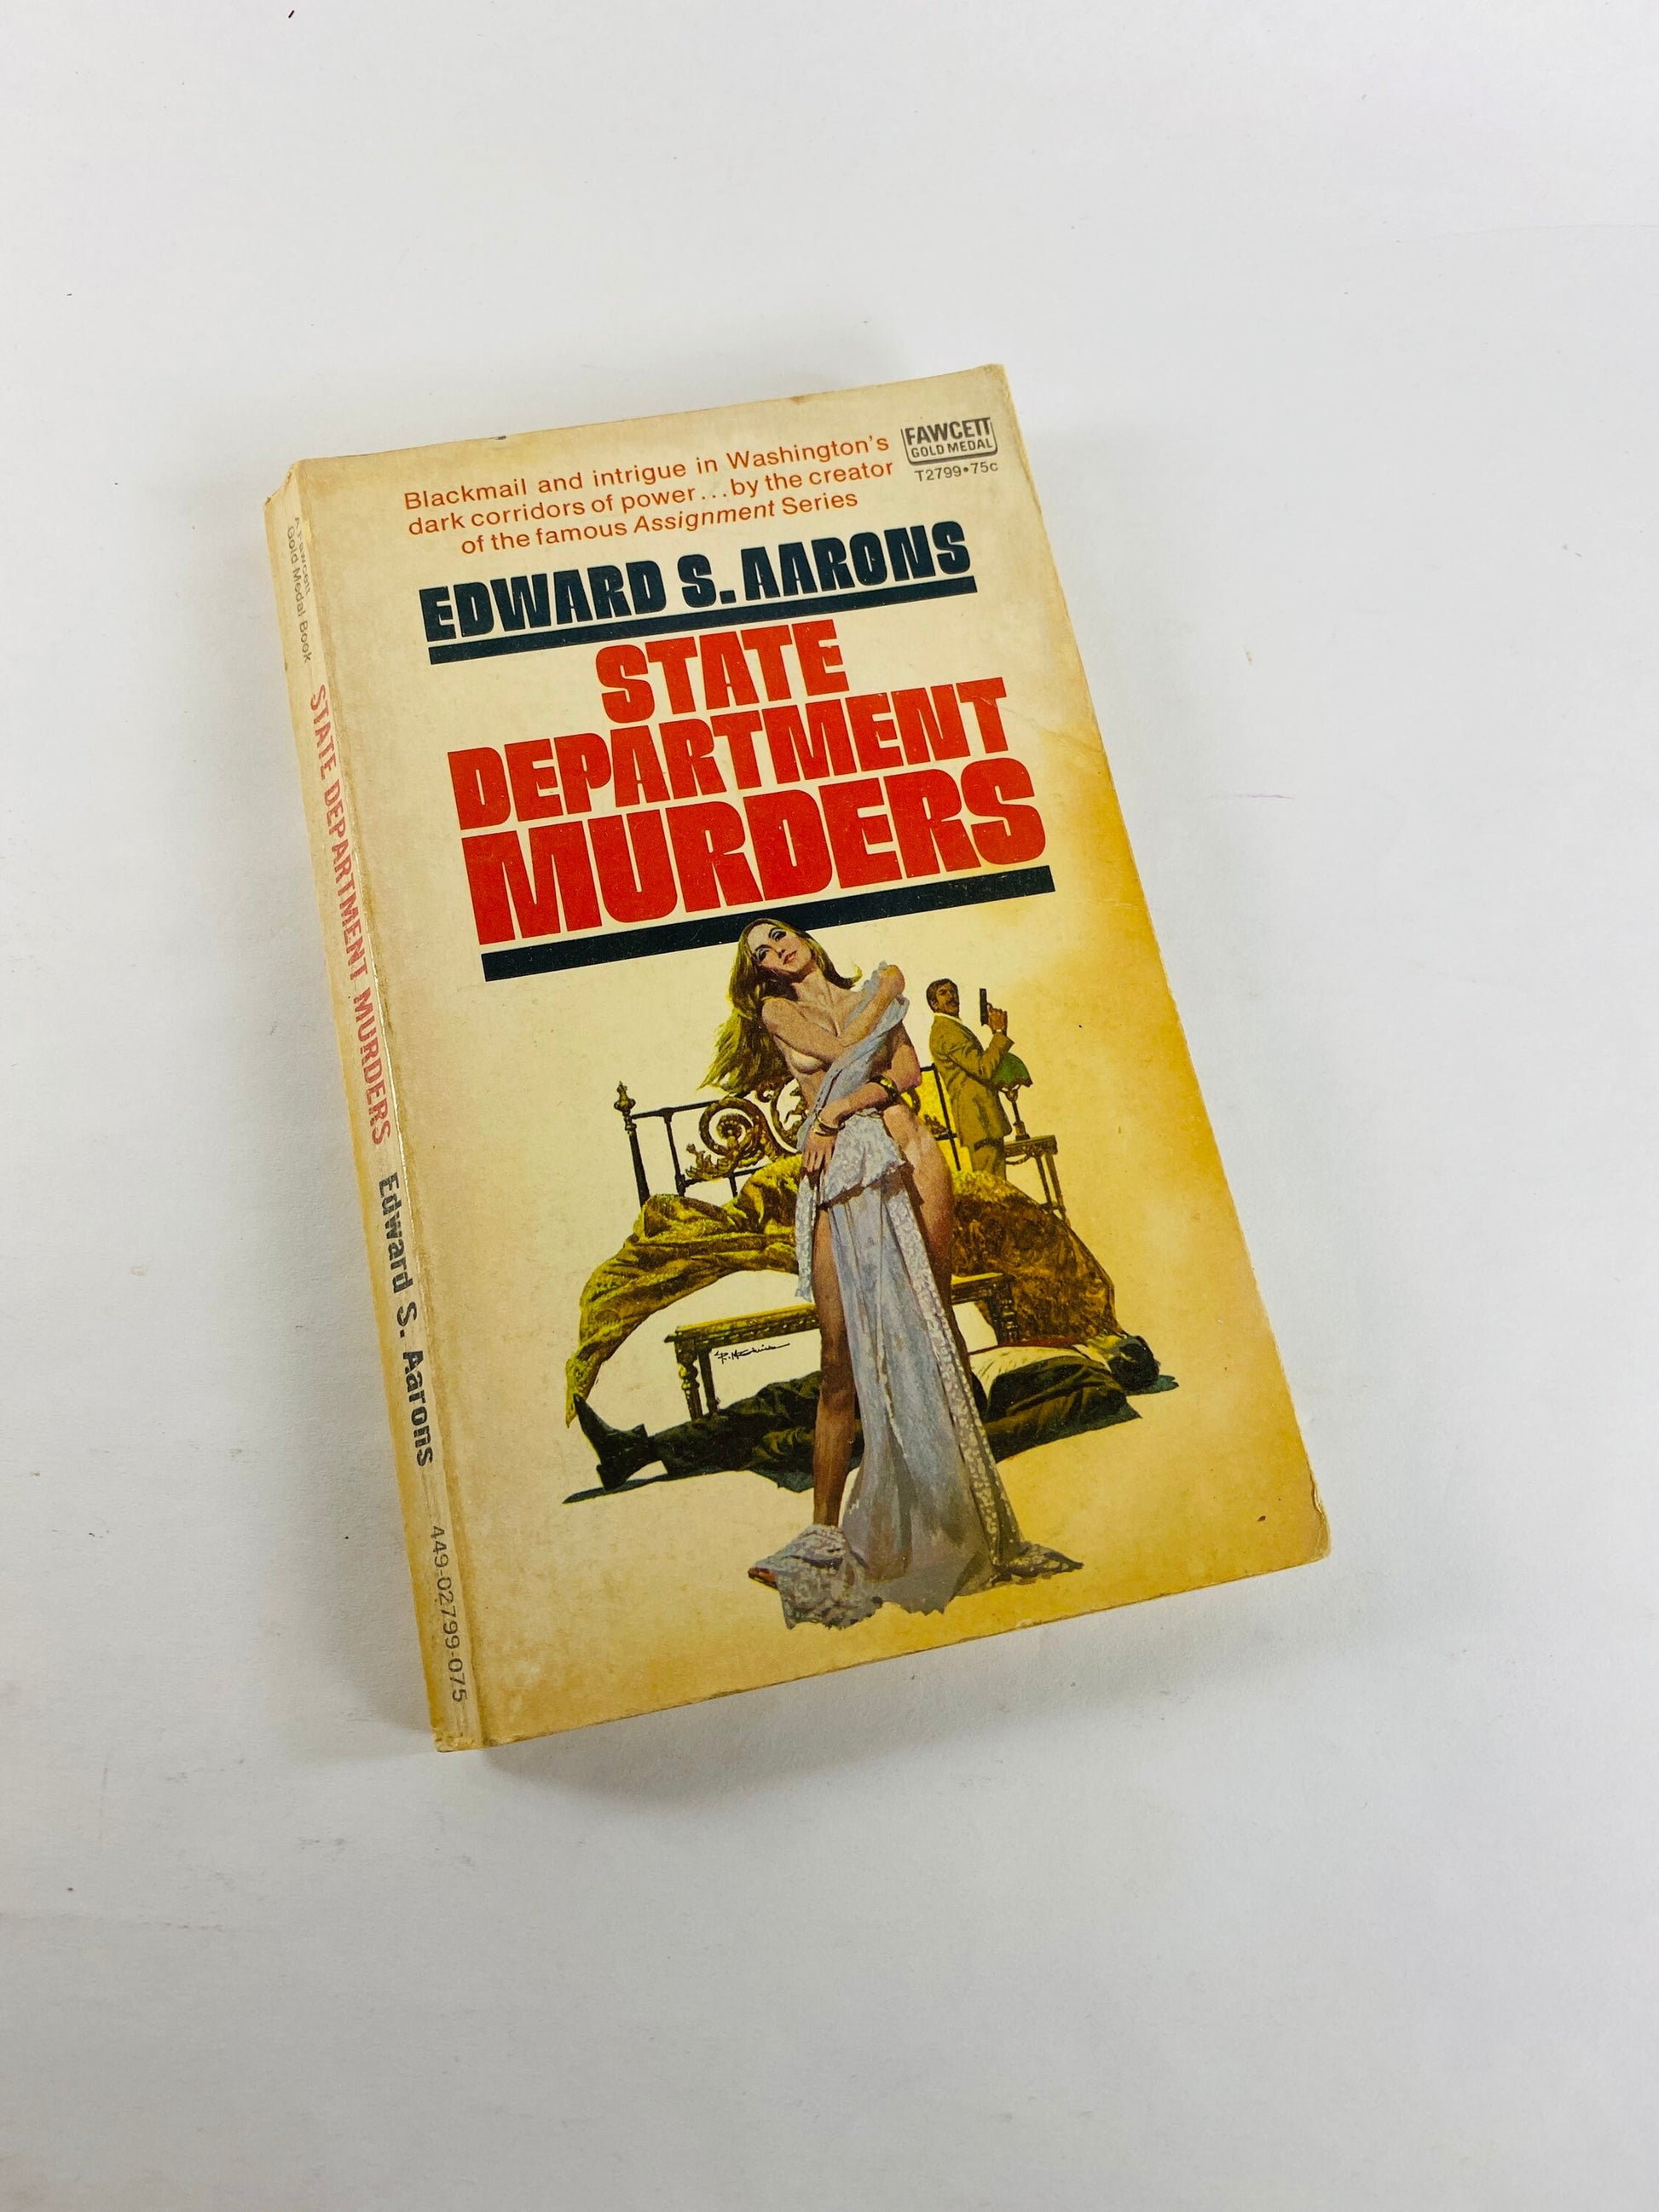 Vintage Edward S Aarons paperback book 1950s xxx erotica smut murder mystery crime fiction pulp State Department Treason Assignment Murders